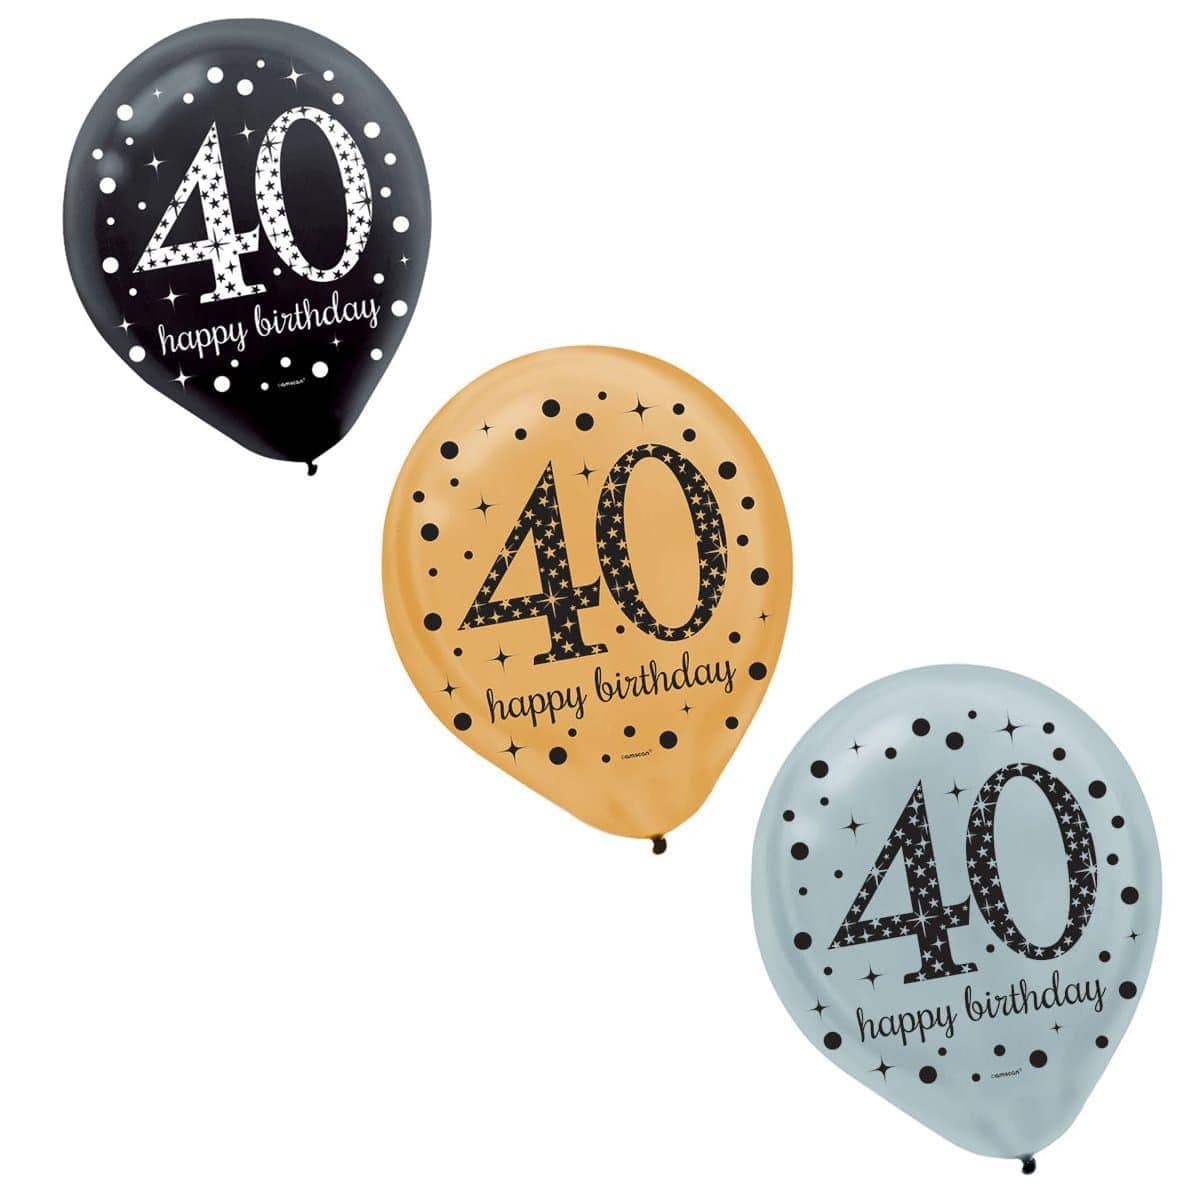 Buy Age Specific Birthday 40th Sparkling Celeb - Latex Balloons 15/pkg sold at Party Expert